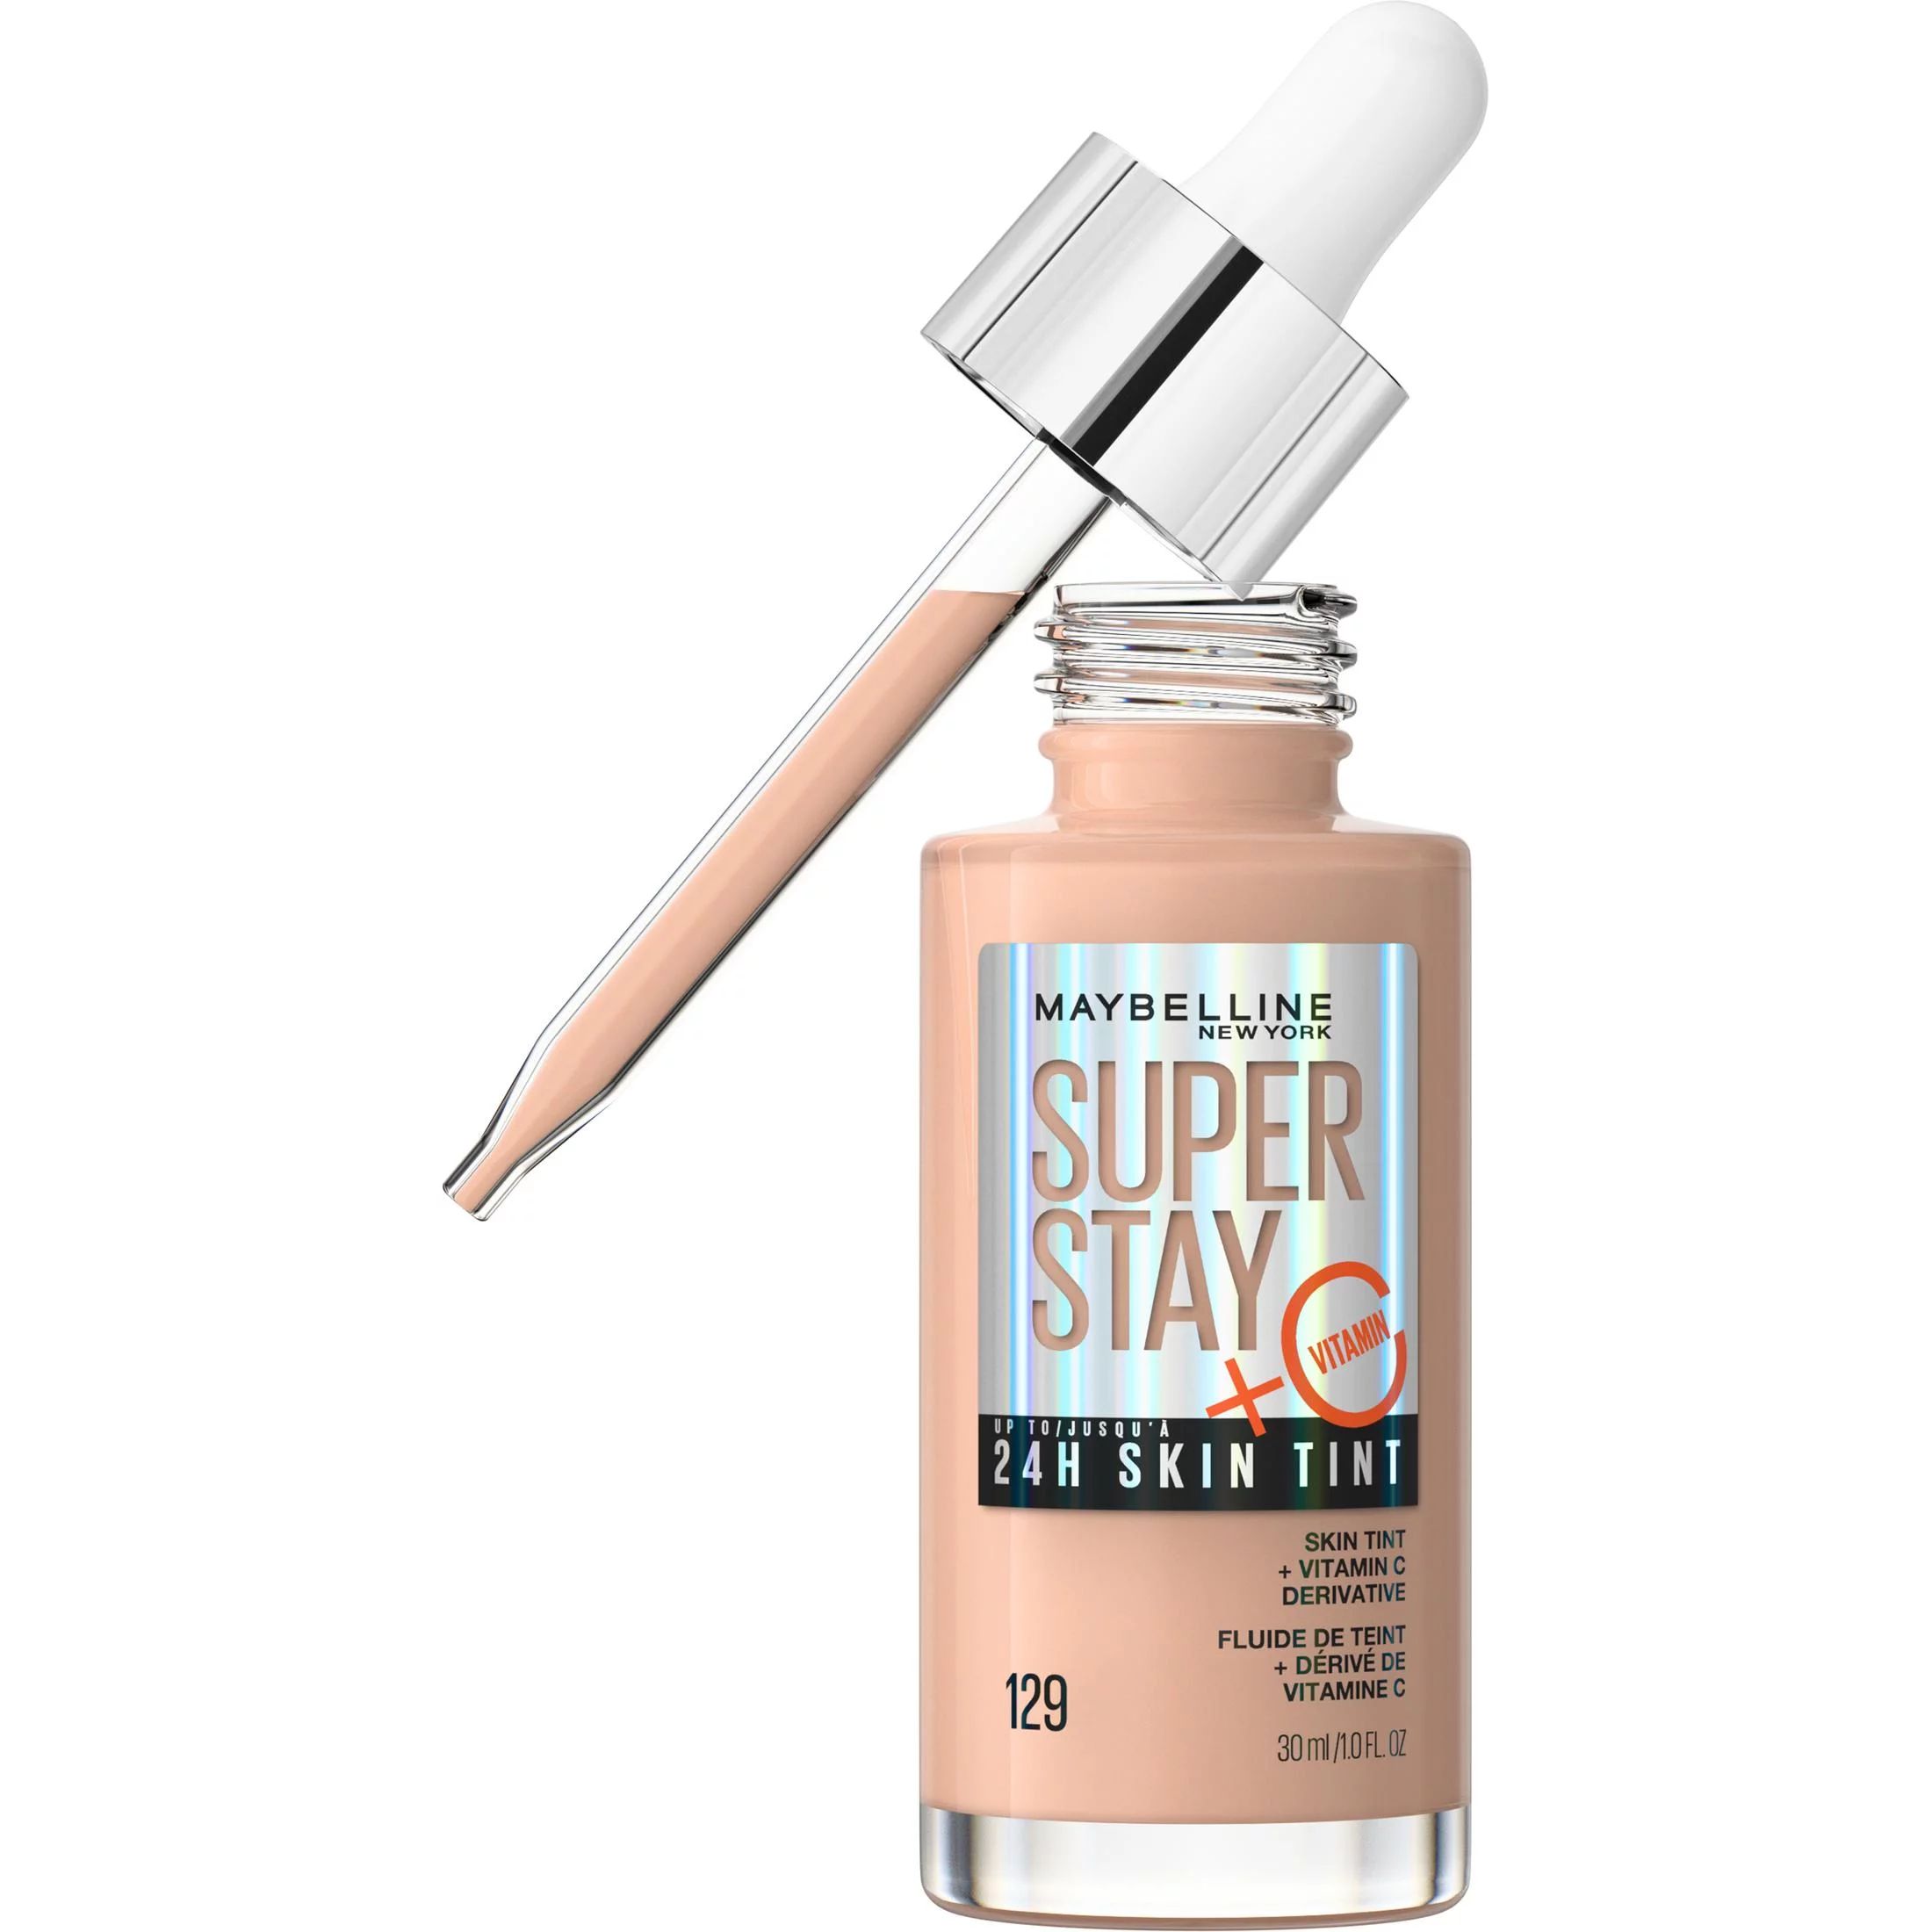 Maybelline Super Stay Super Stay Up to 24HR Skin Tint with Vitamin C, 129, 1 fl oz | Walmart (US)